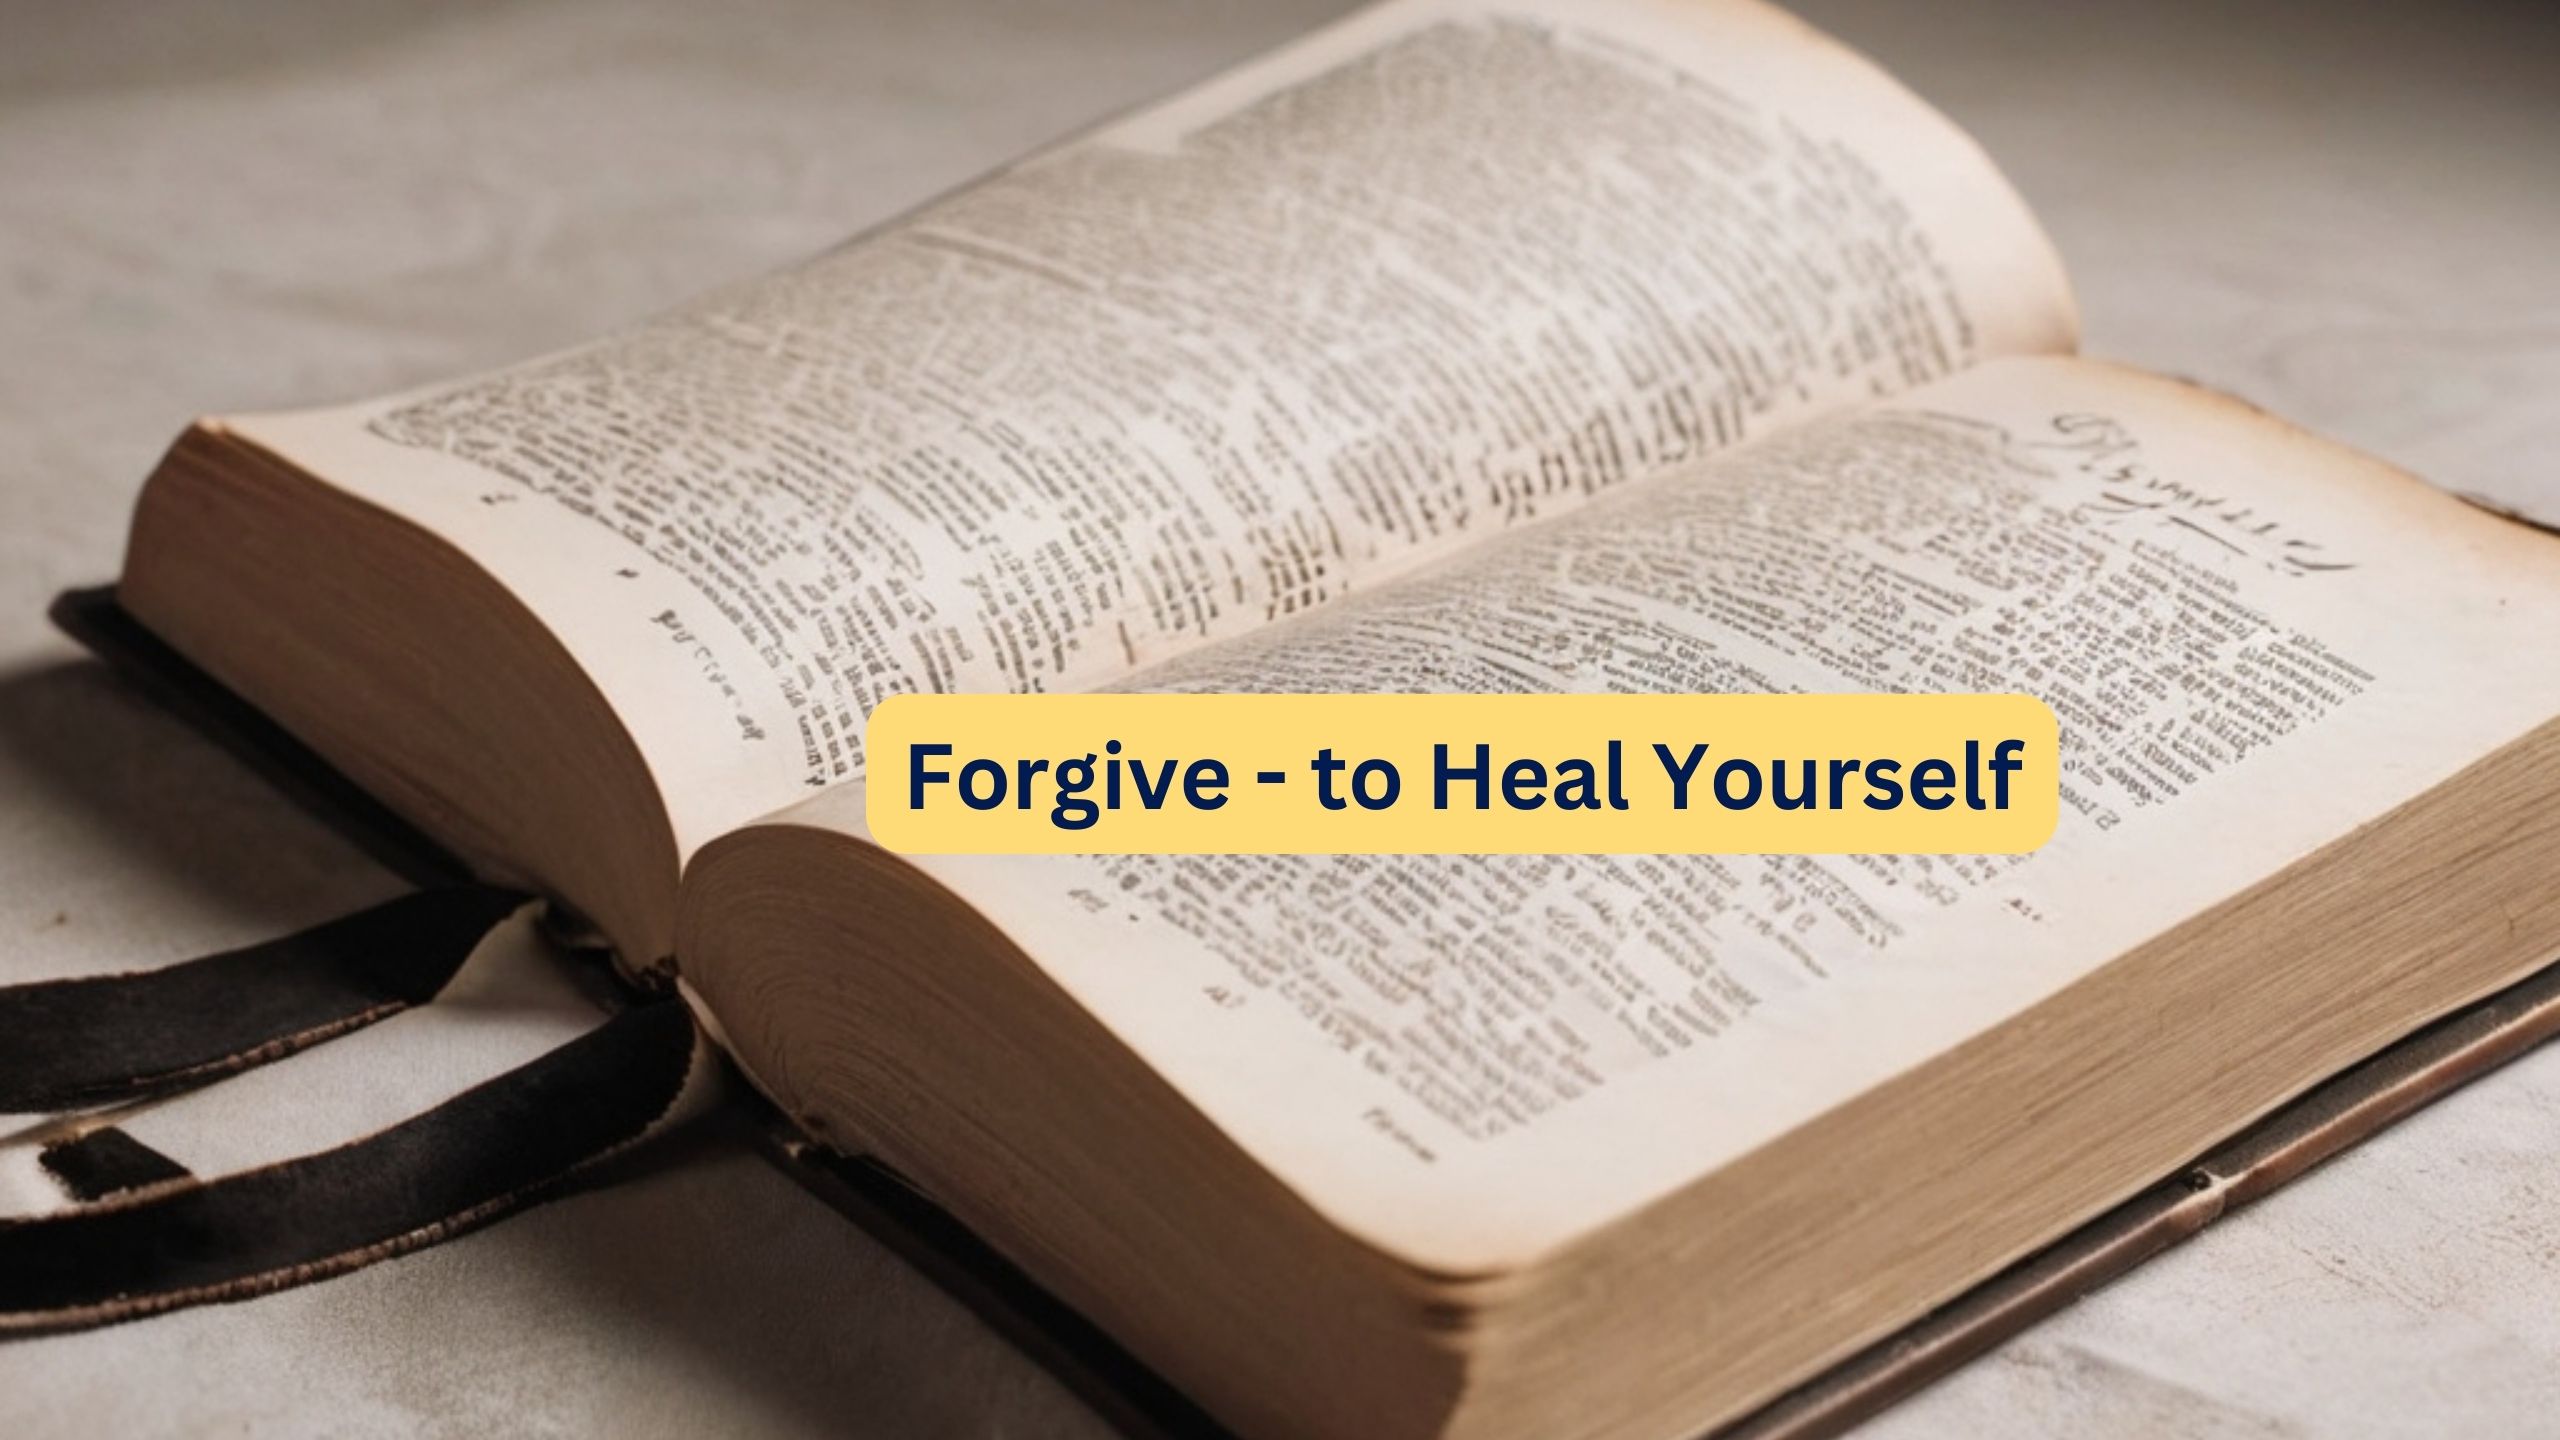 Heal Yourself by Forgiving